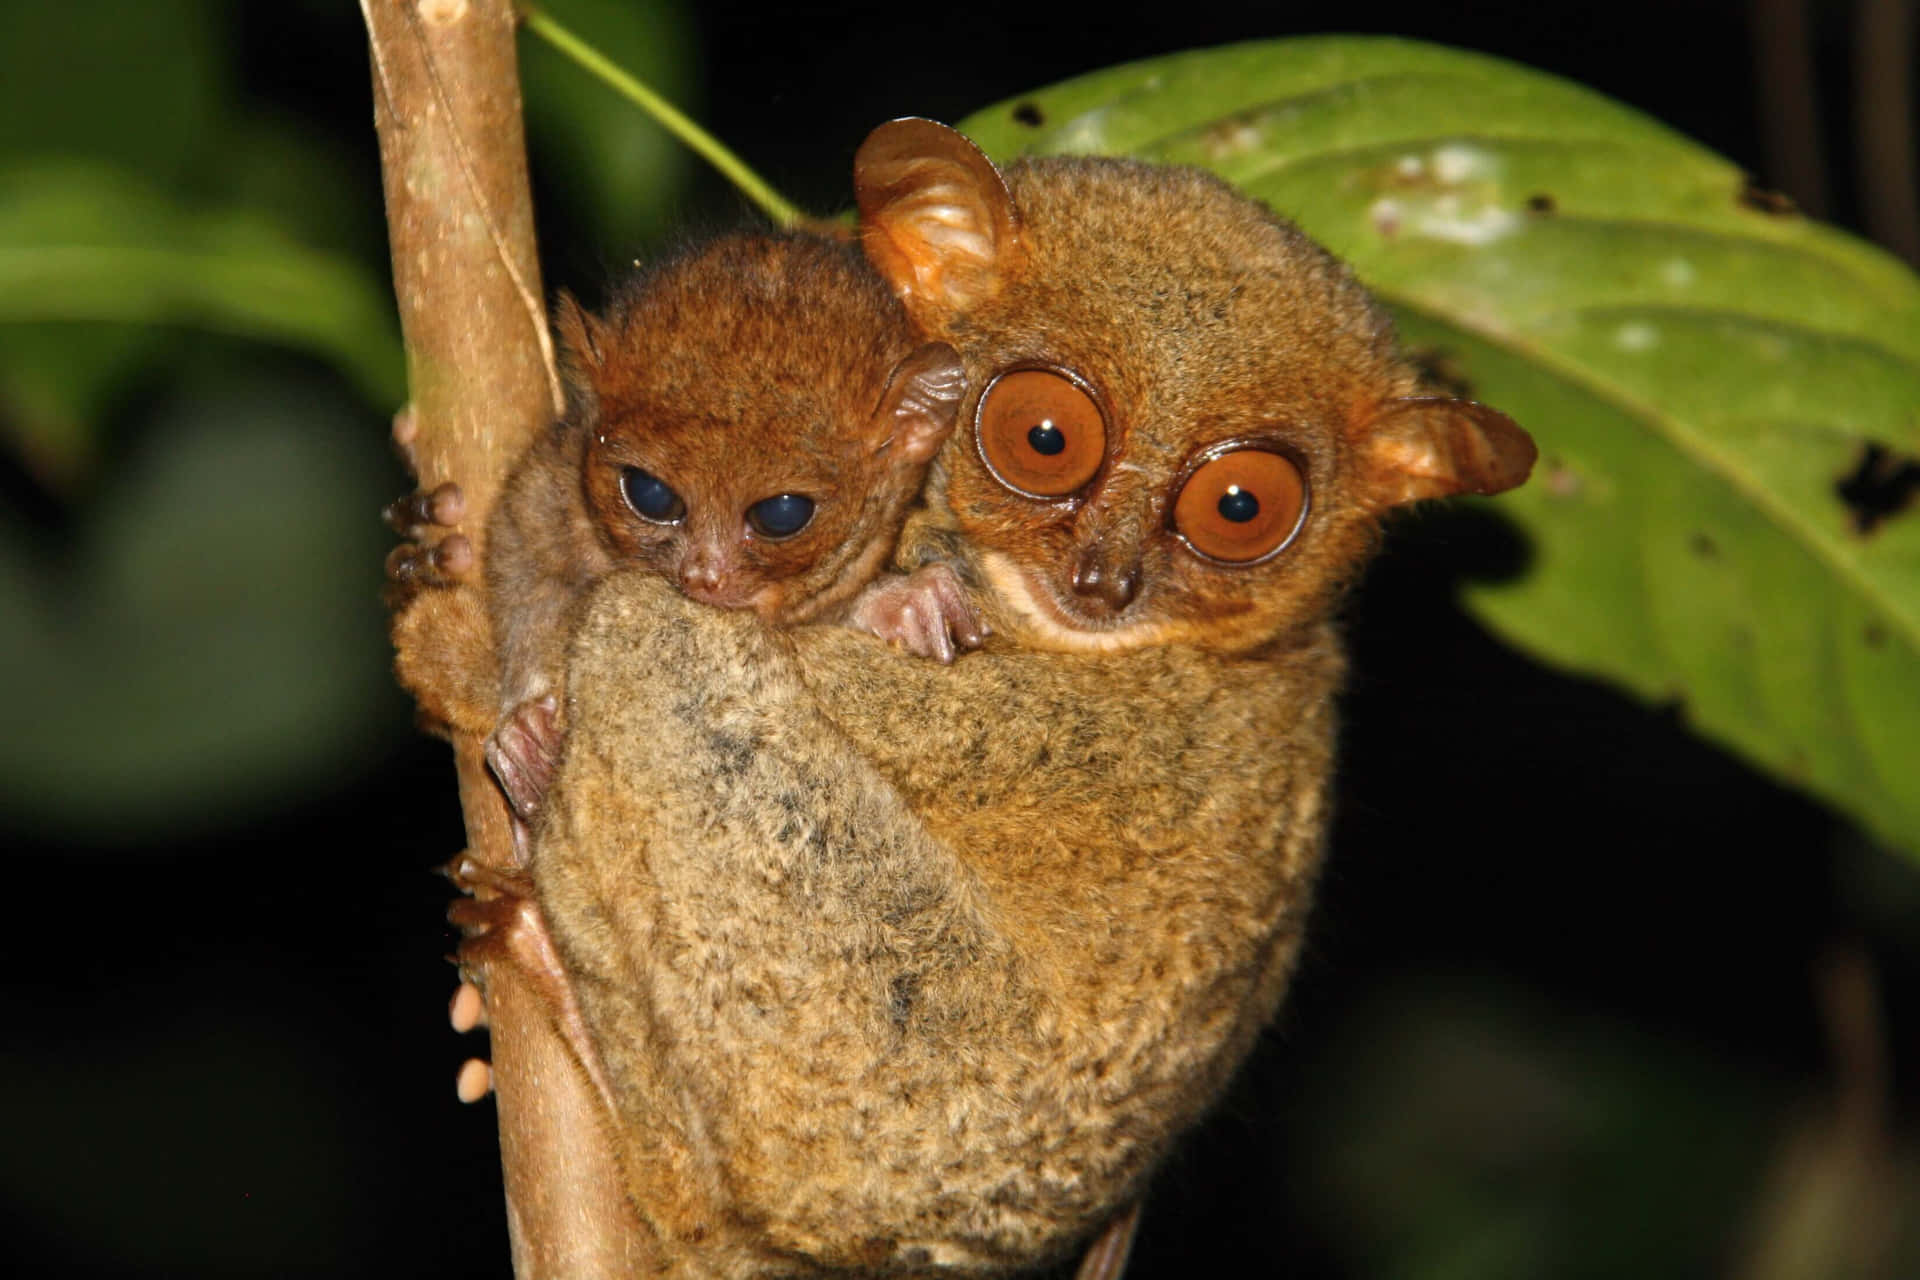 A Baby Tarsier Is Sitting On A Branch